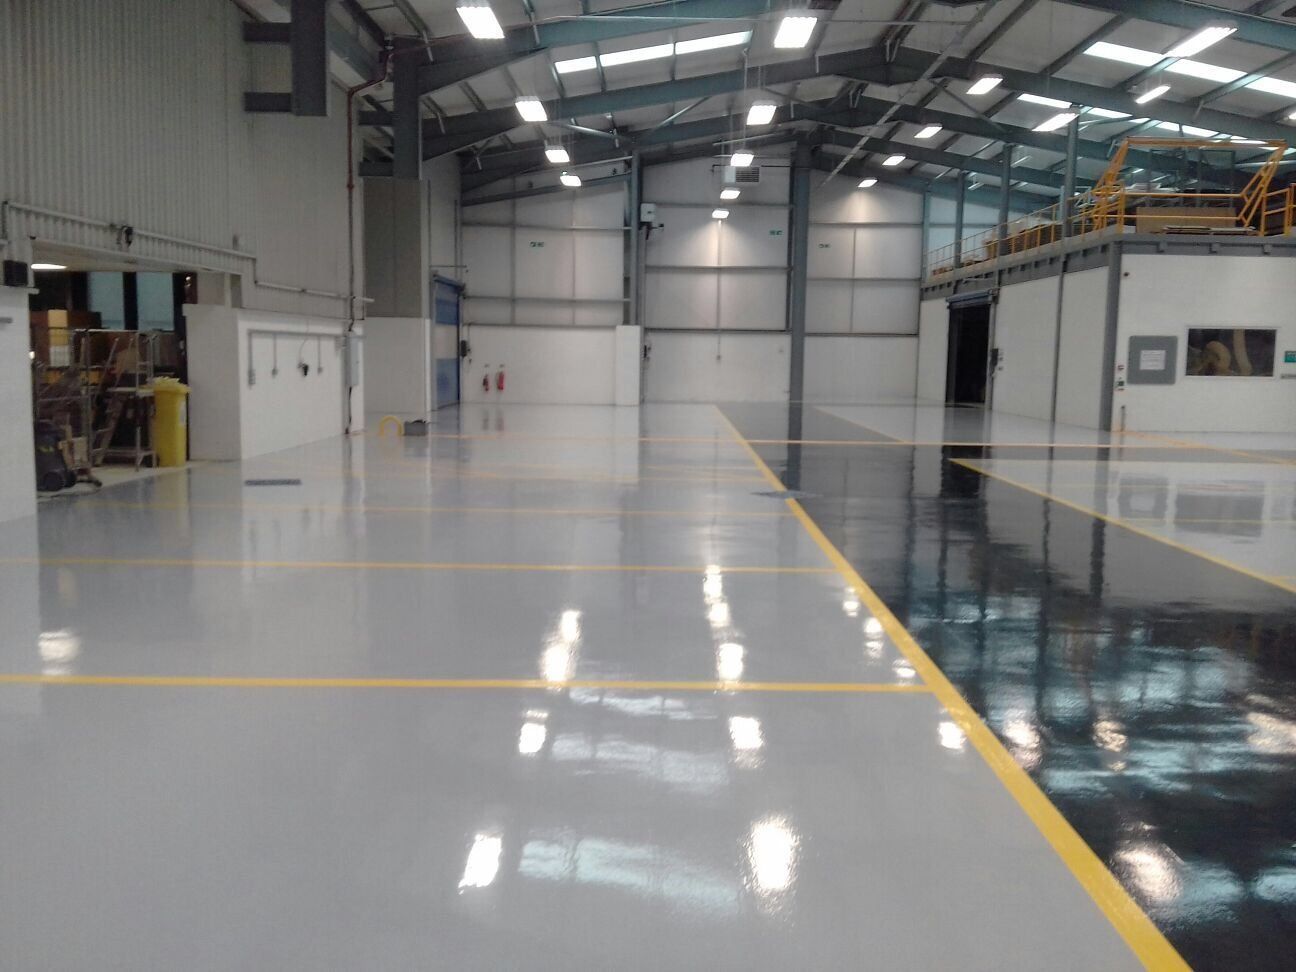 Epoxy Resin flooring solutions from Gallagher Flooring